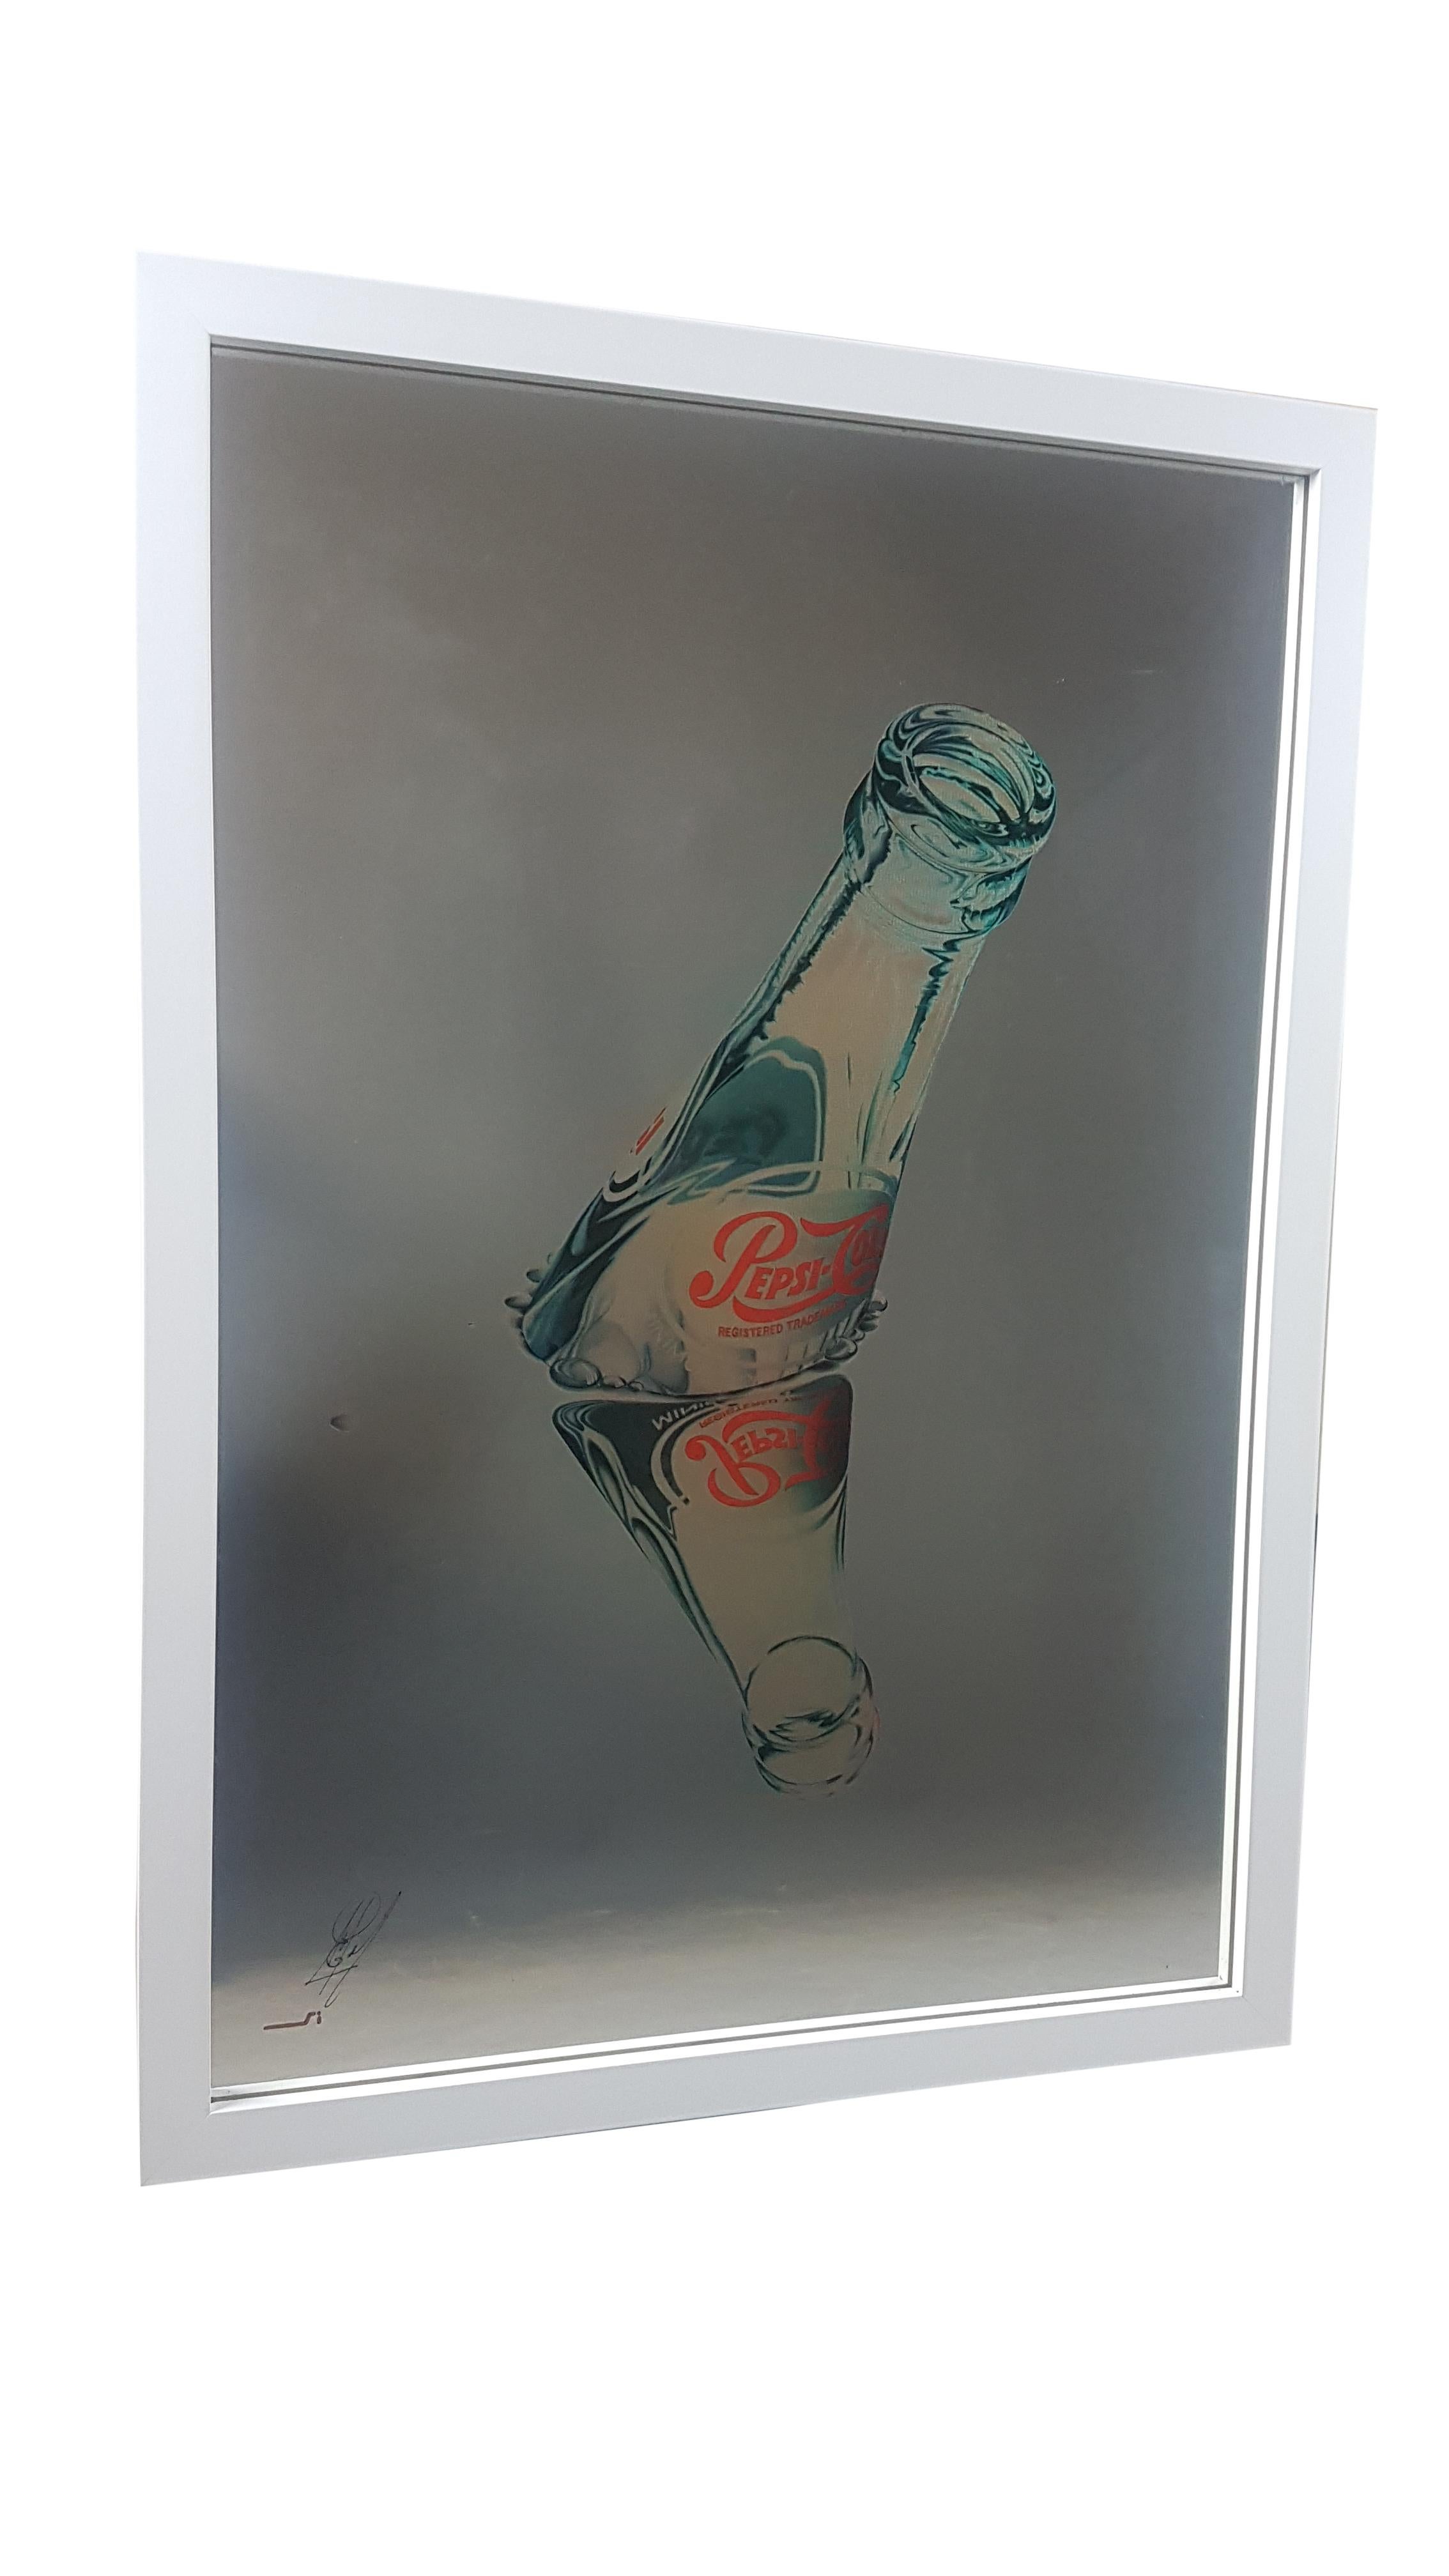 A very cool late 20th century advertising, this is a reverse printed on glass artwork and is signed in the bottom left of the mirror although I am unable to make out the signature. There are marks to the glass front and back as can be seen in the